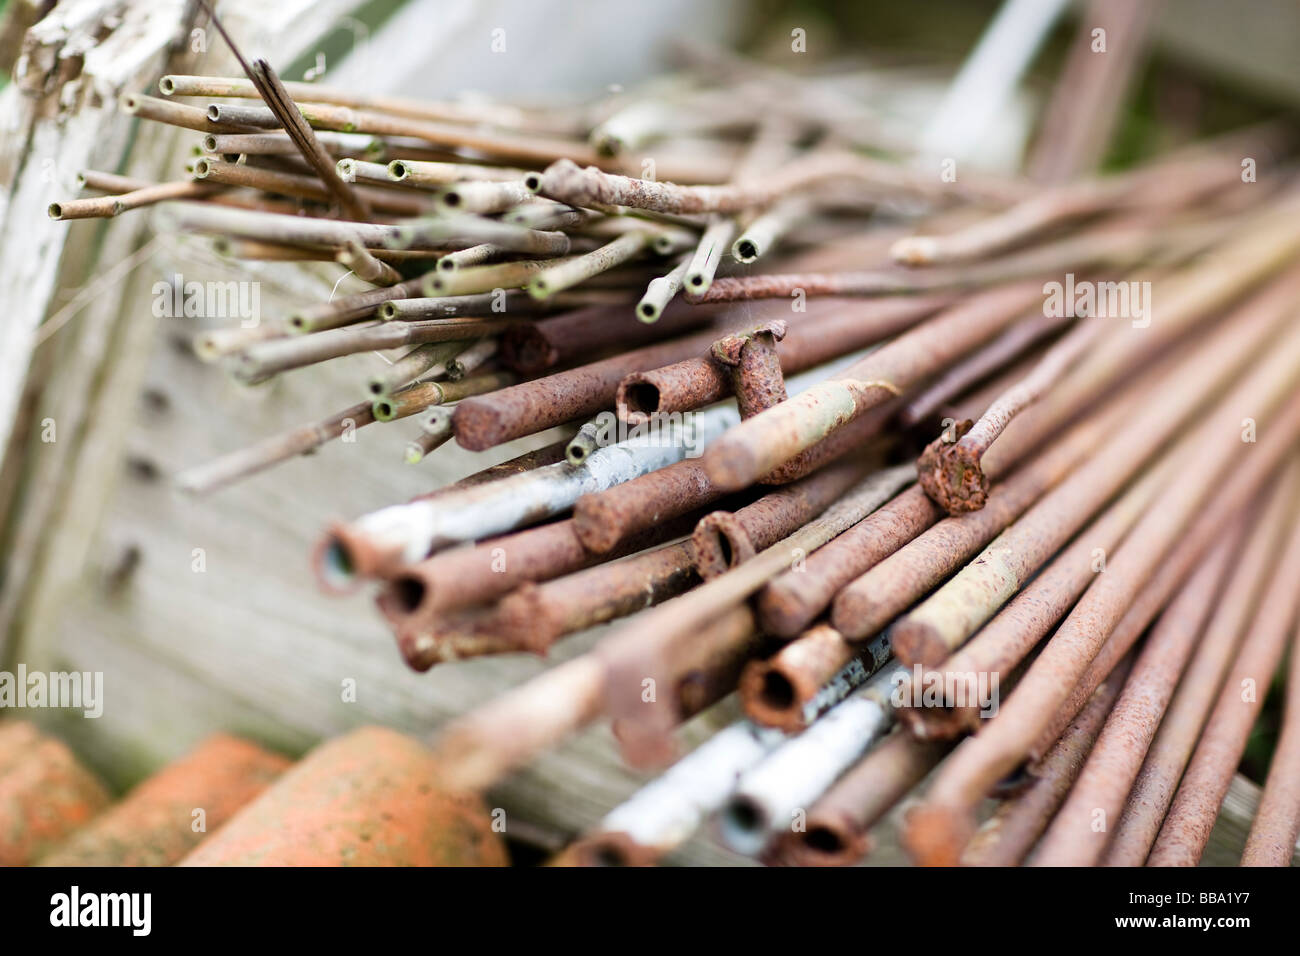 A bundle of rusted metal, bamboo and willow stakes in a wooden box on an allotment Stock Photo